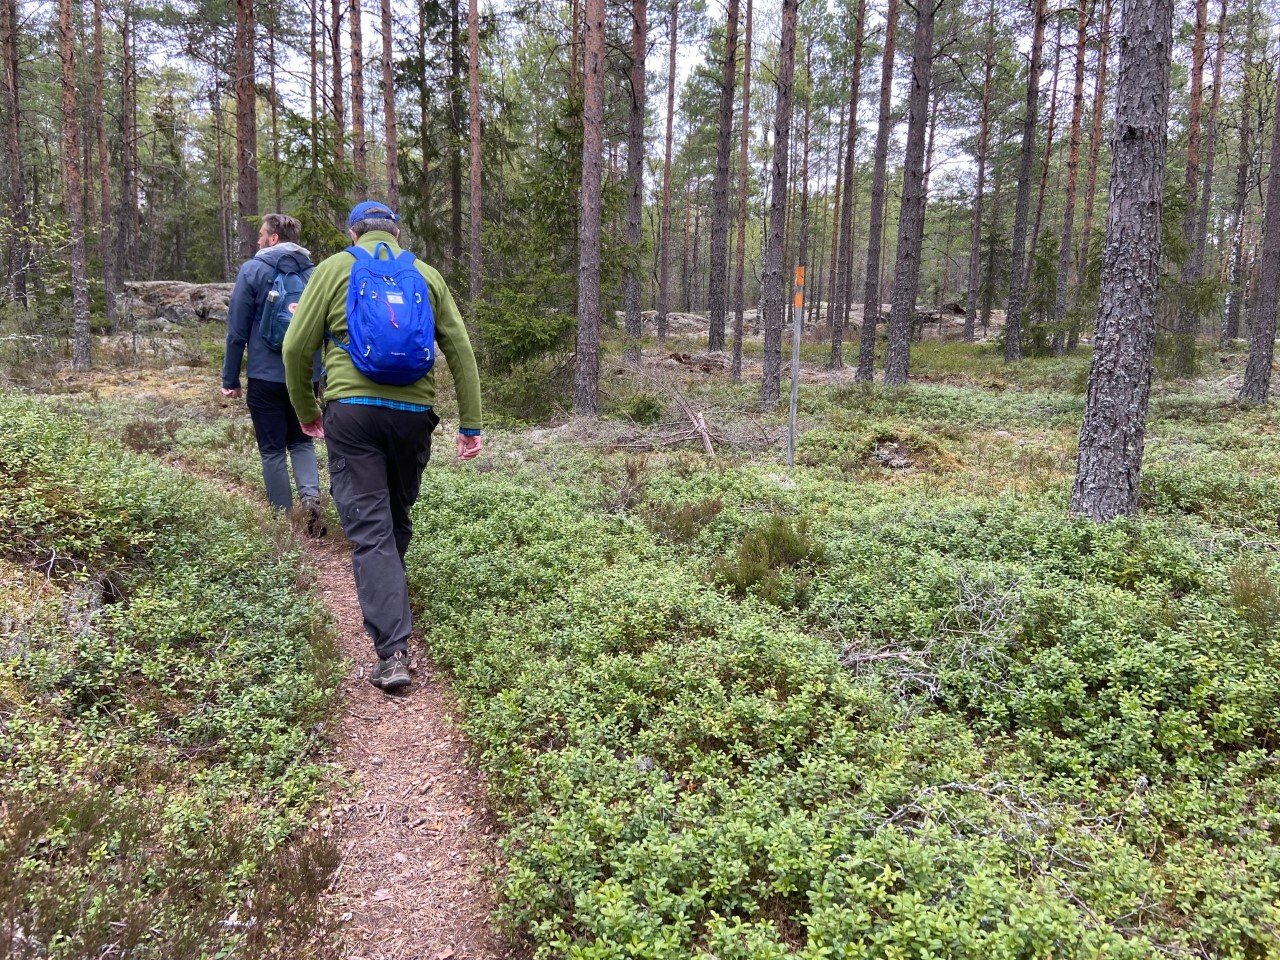 The Uppland Trail, section 22, 9.5 km